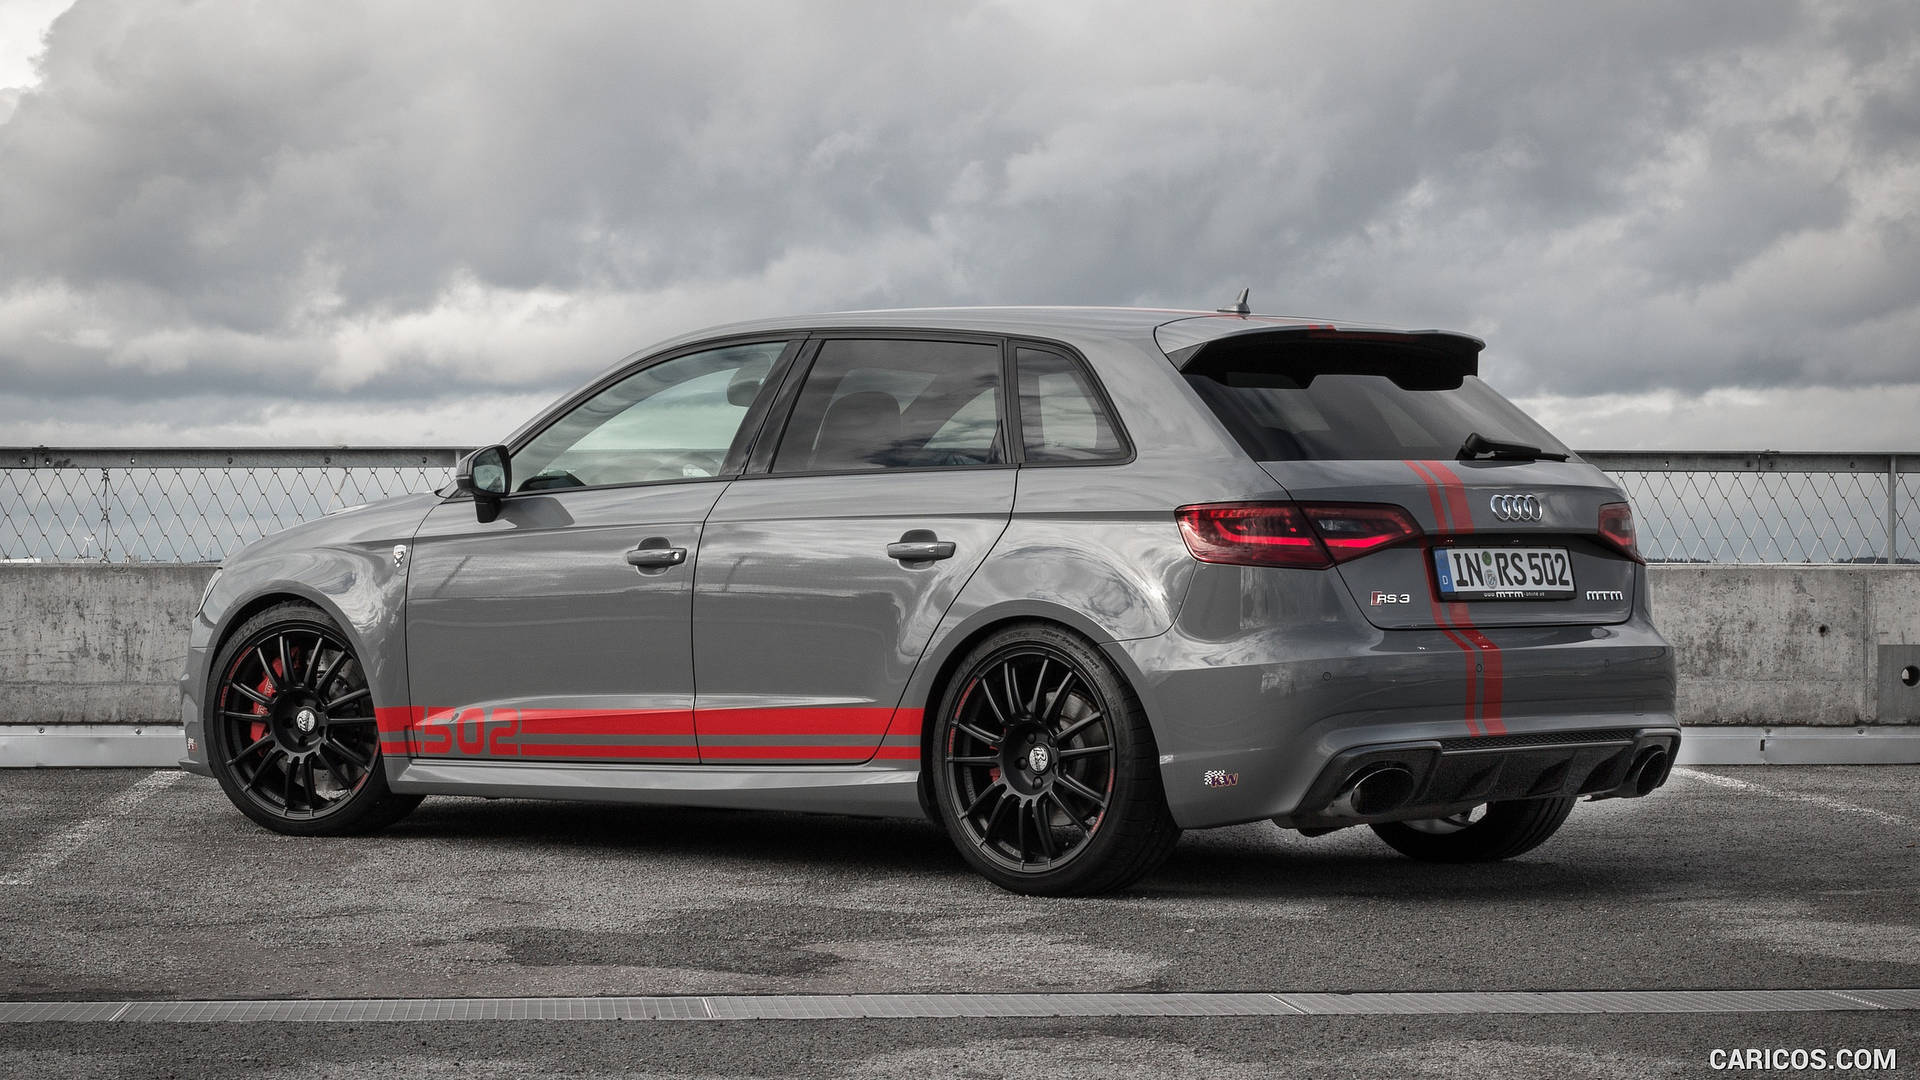 Powerful Sophistication - Grey Audi Rs With Red Accents Background